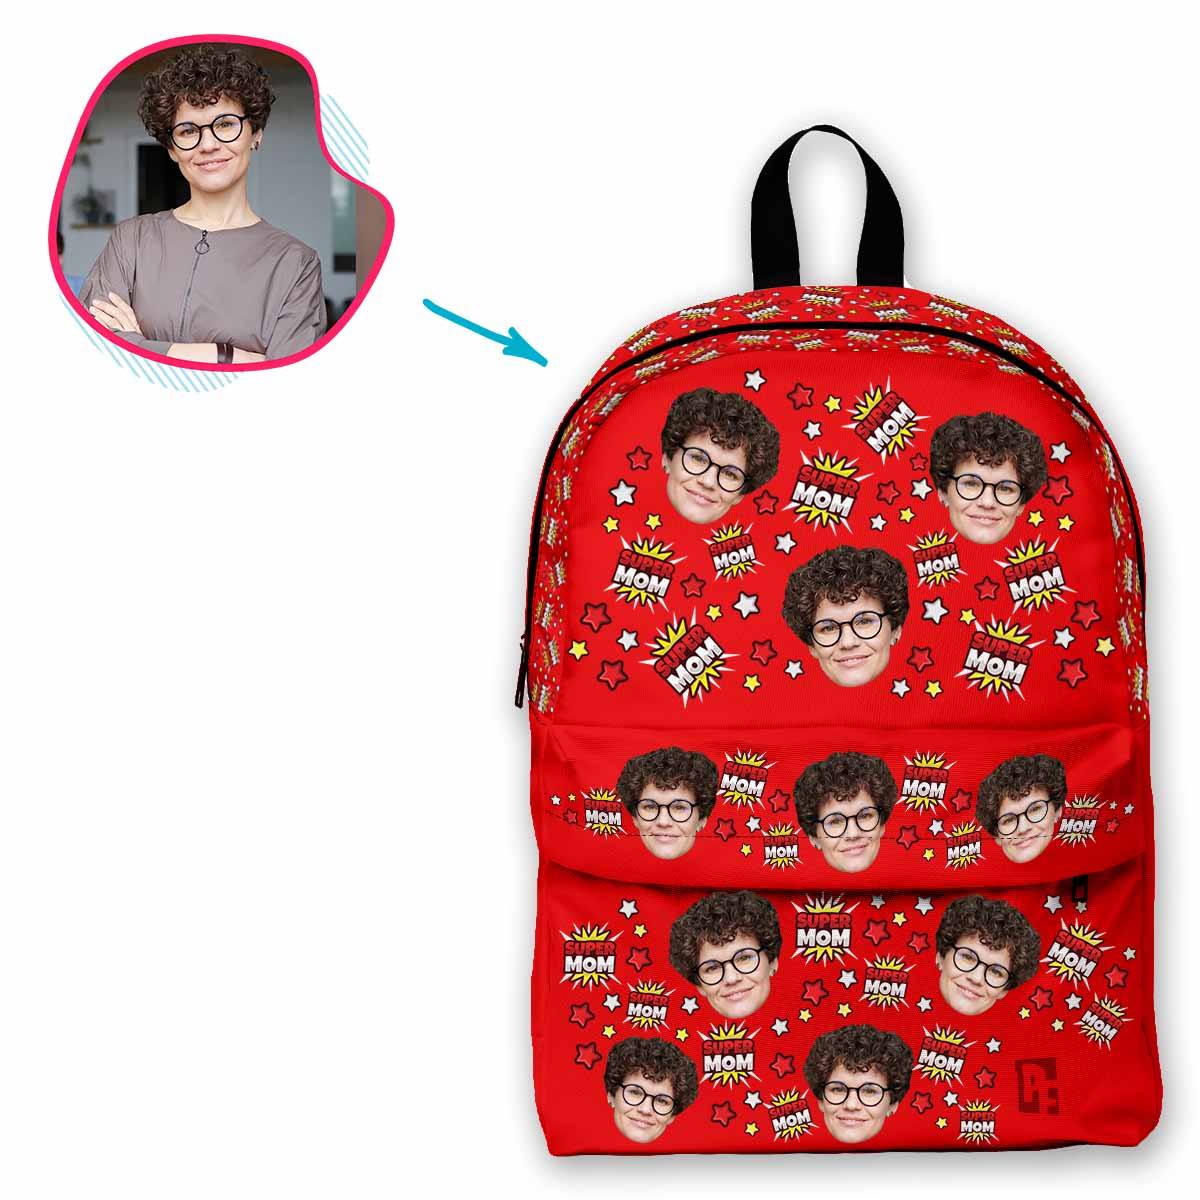 red Super Mom classic backpack personalized with photo of face printed on it